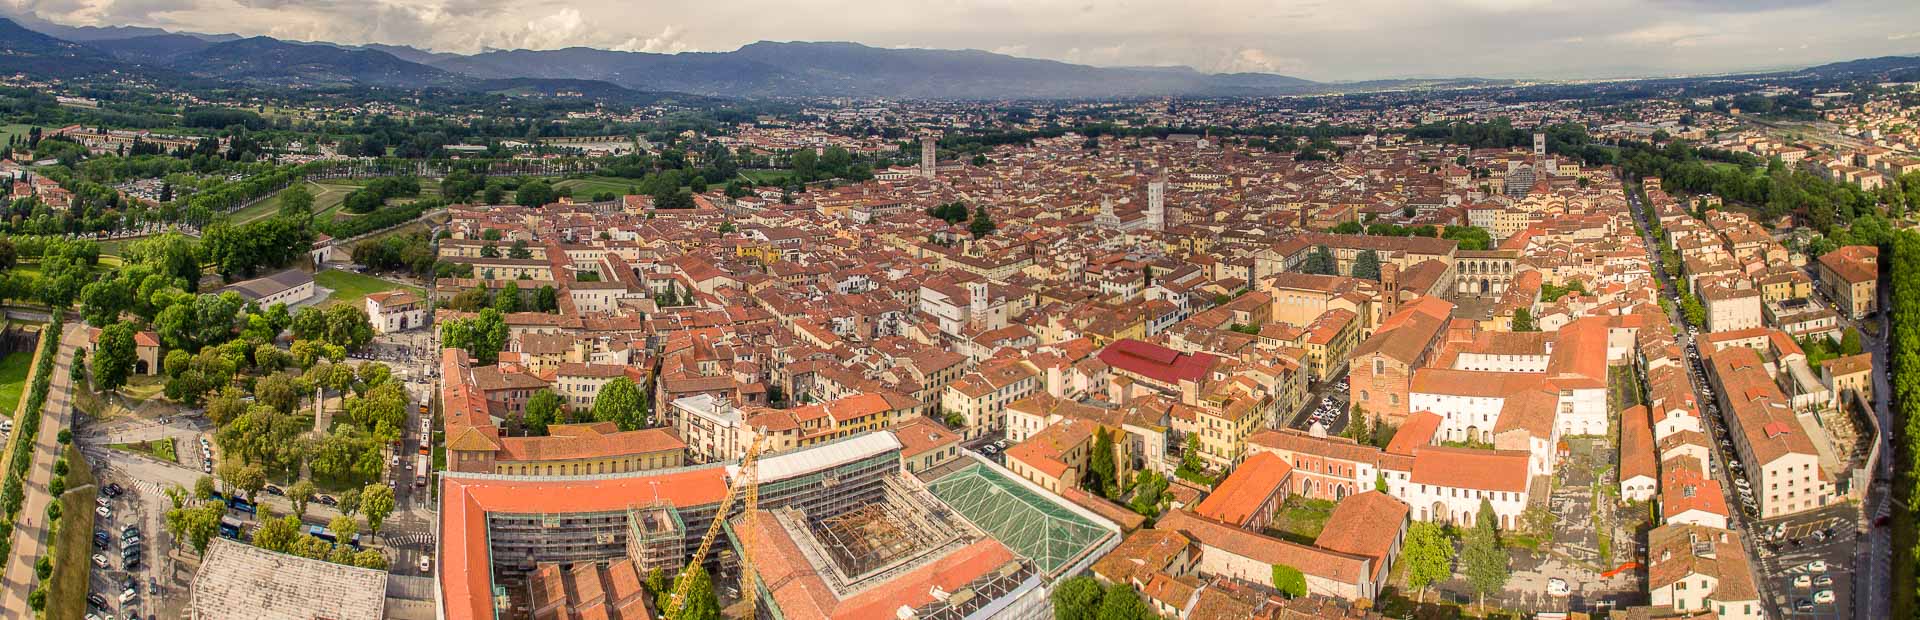 panorama of the walled city of Lucca